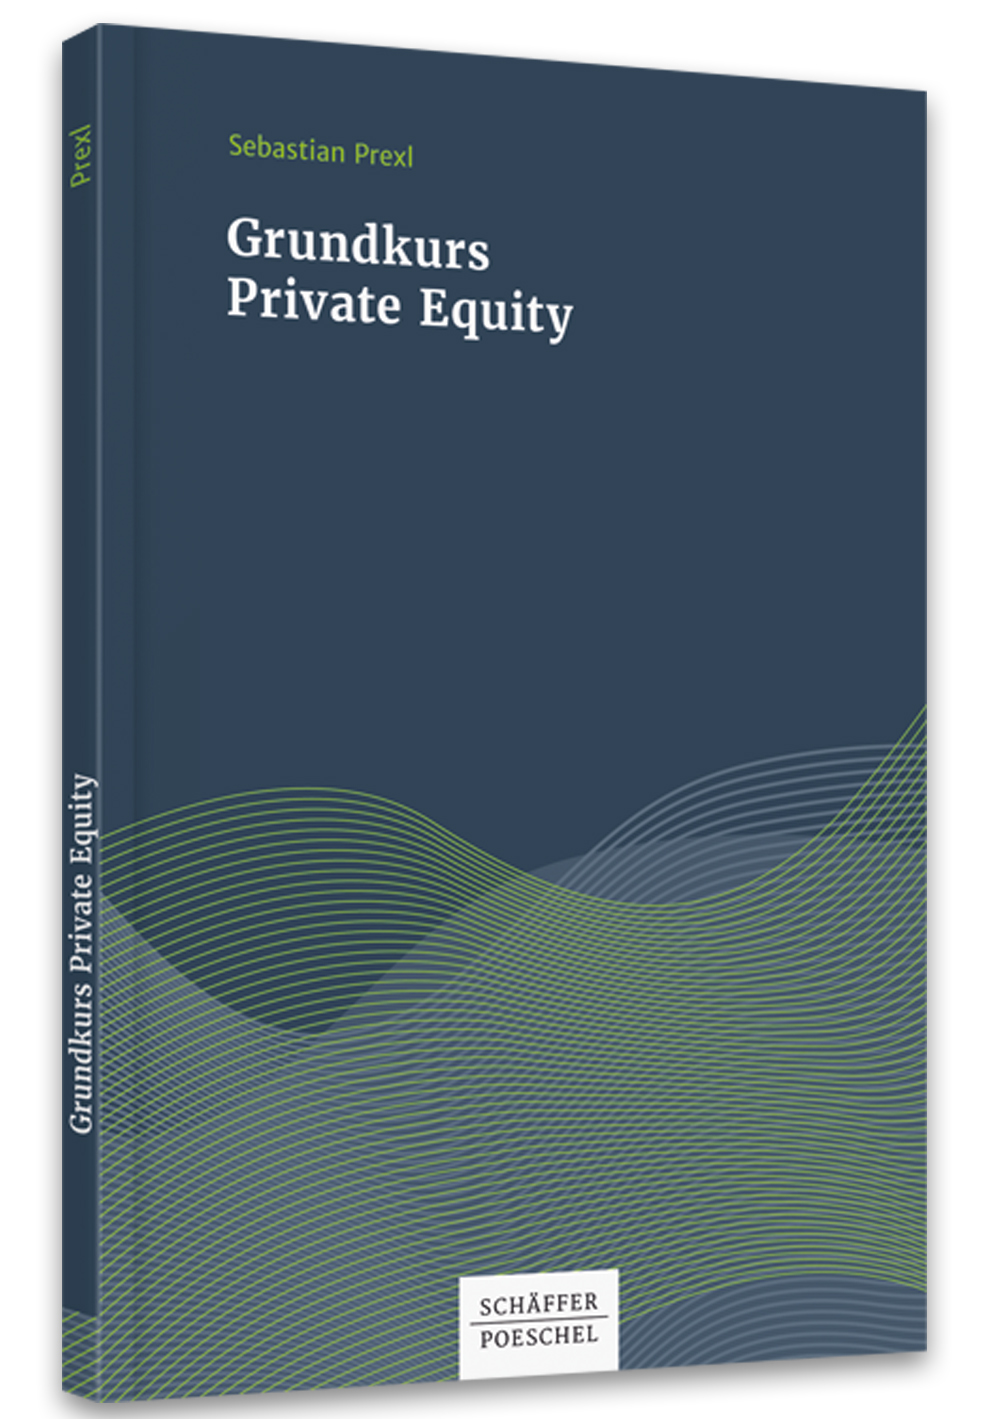 Grundkurs Private Equity